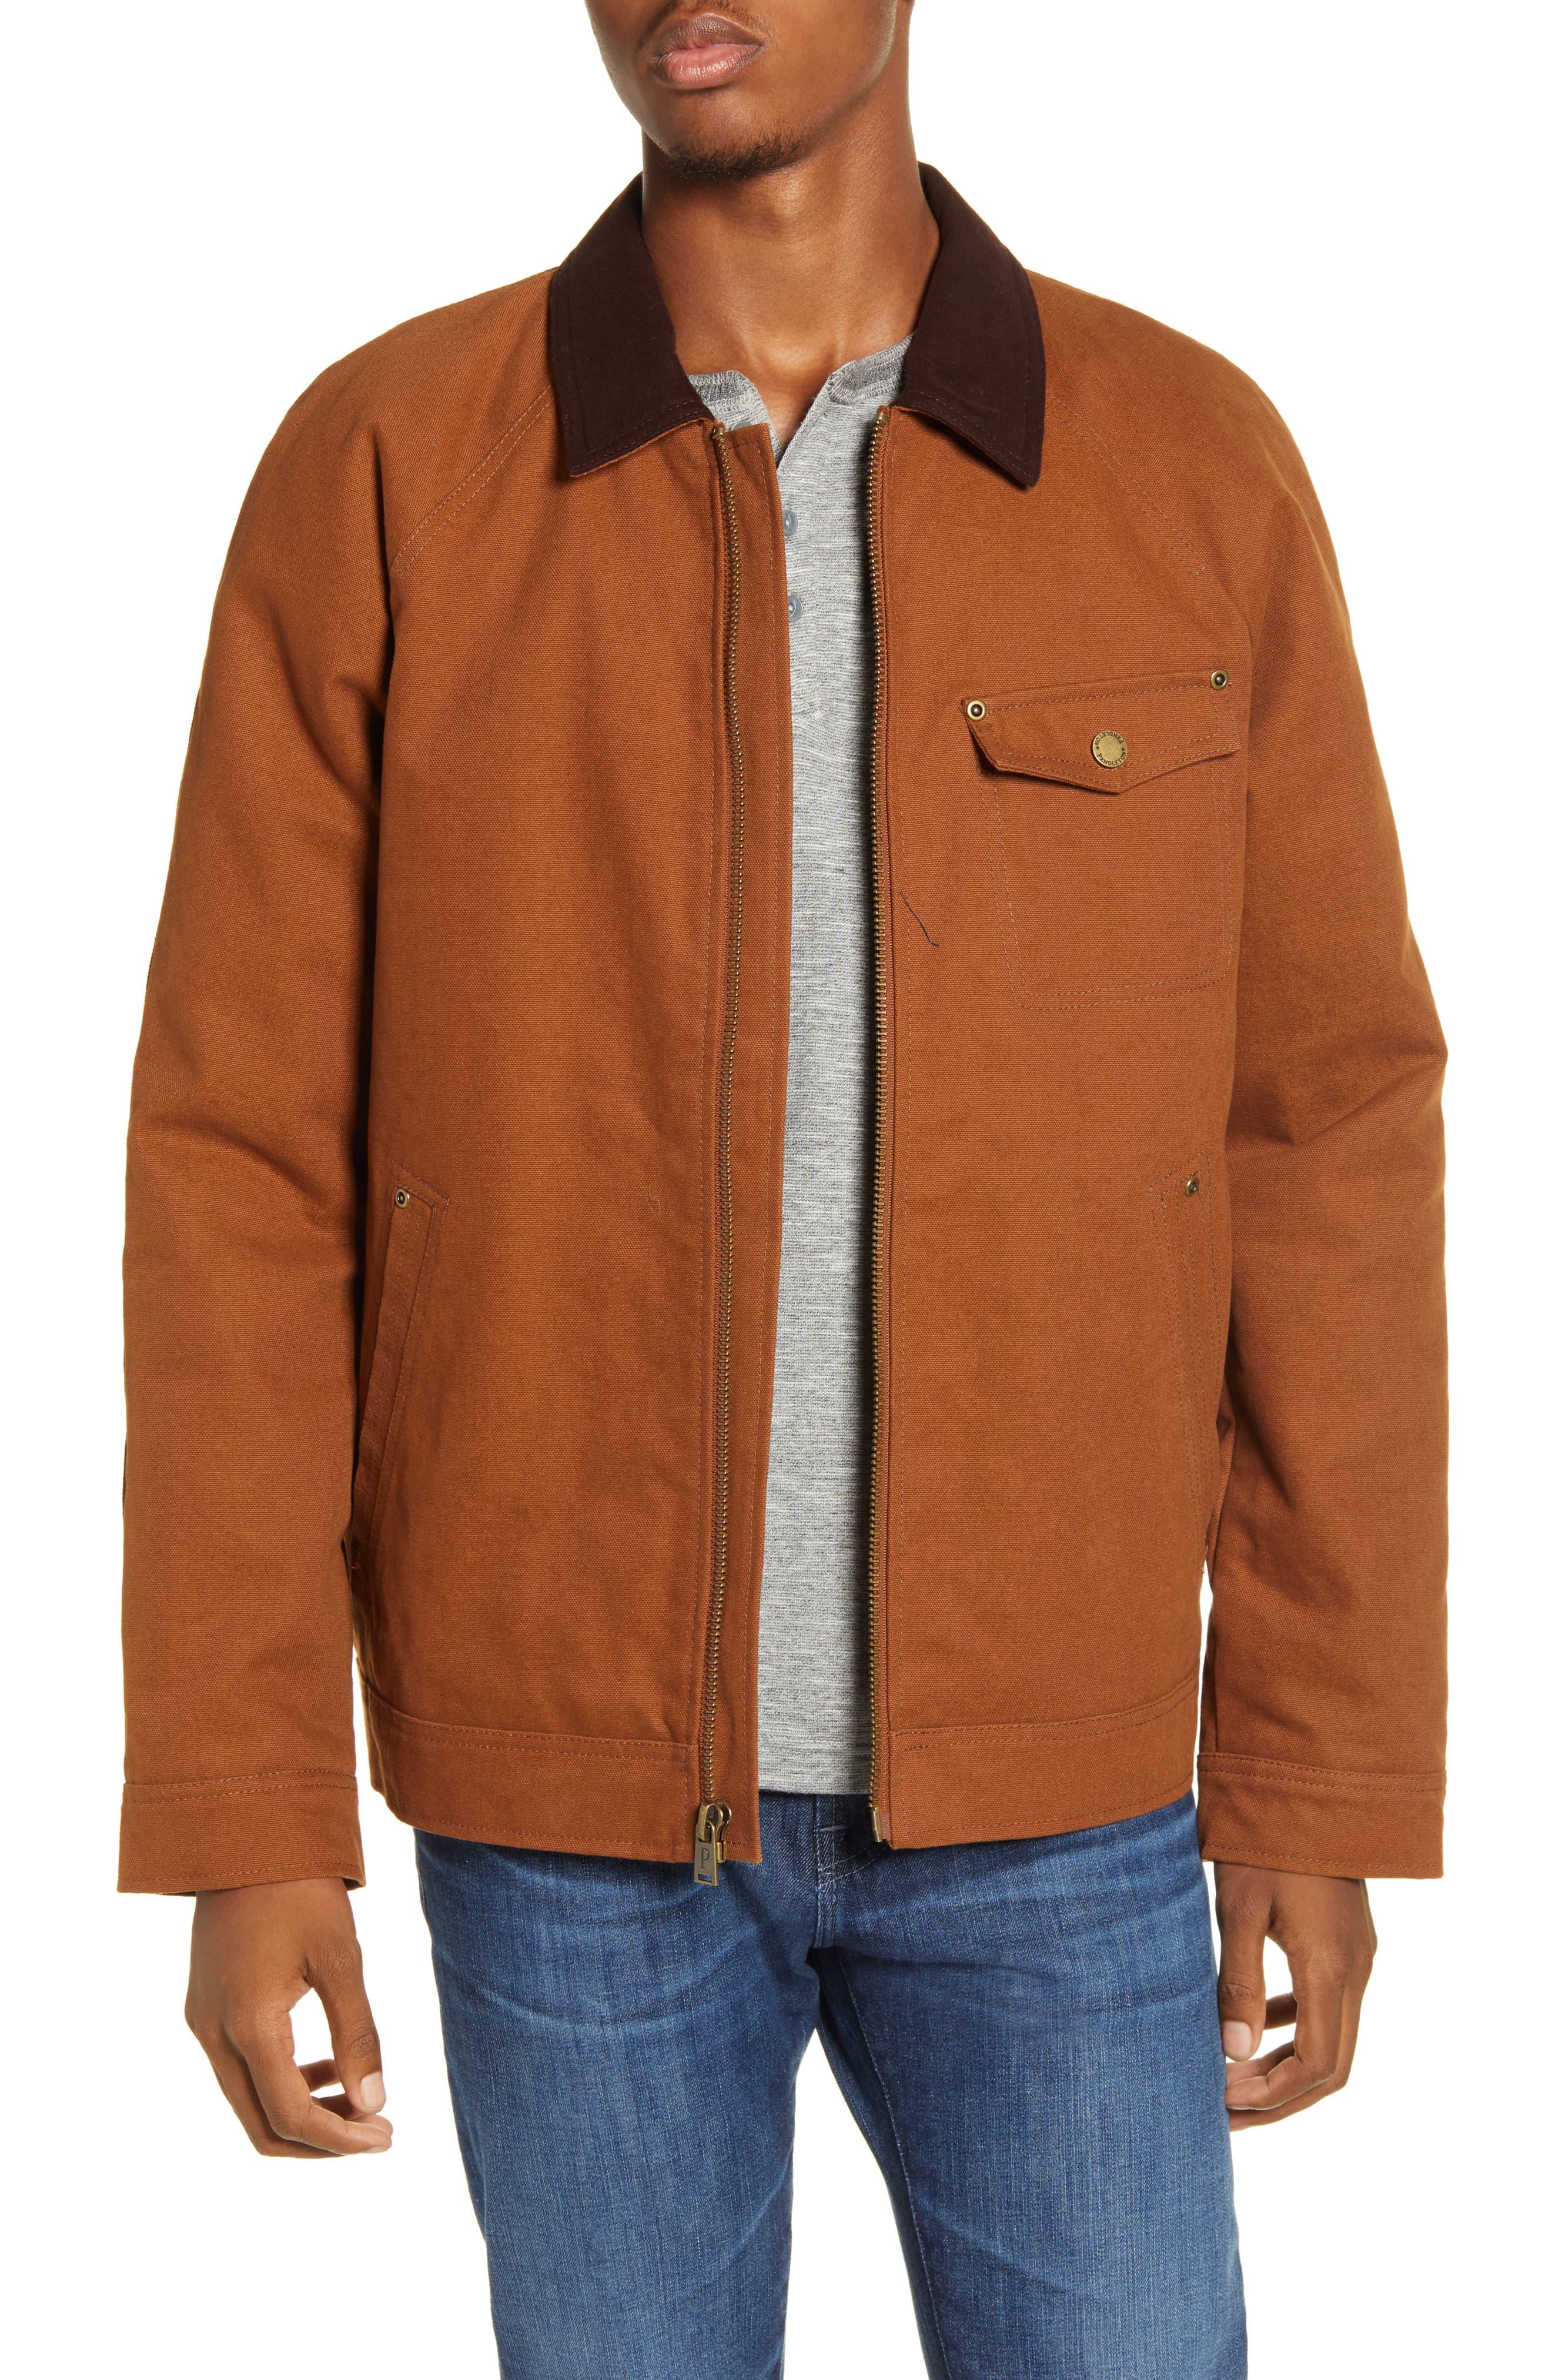 Pendleton Wild Horse Canvas Jacket in Brown for Men - Lyst